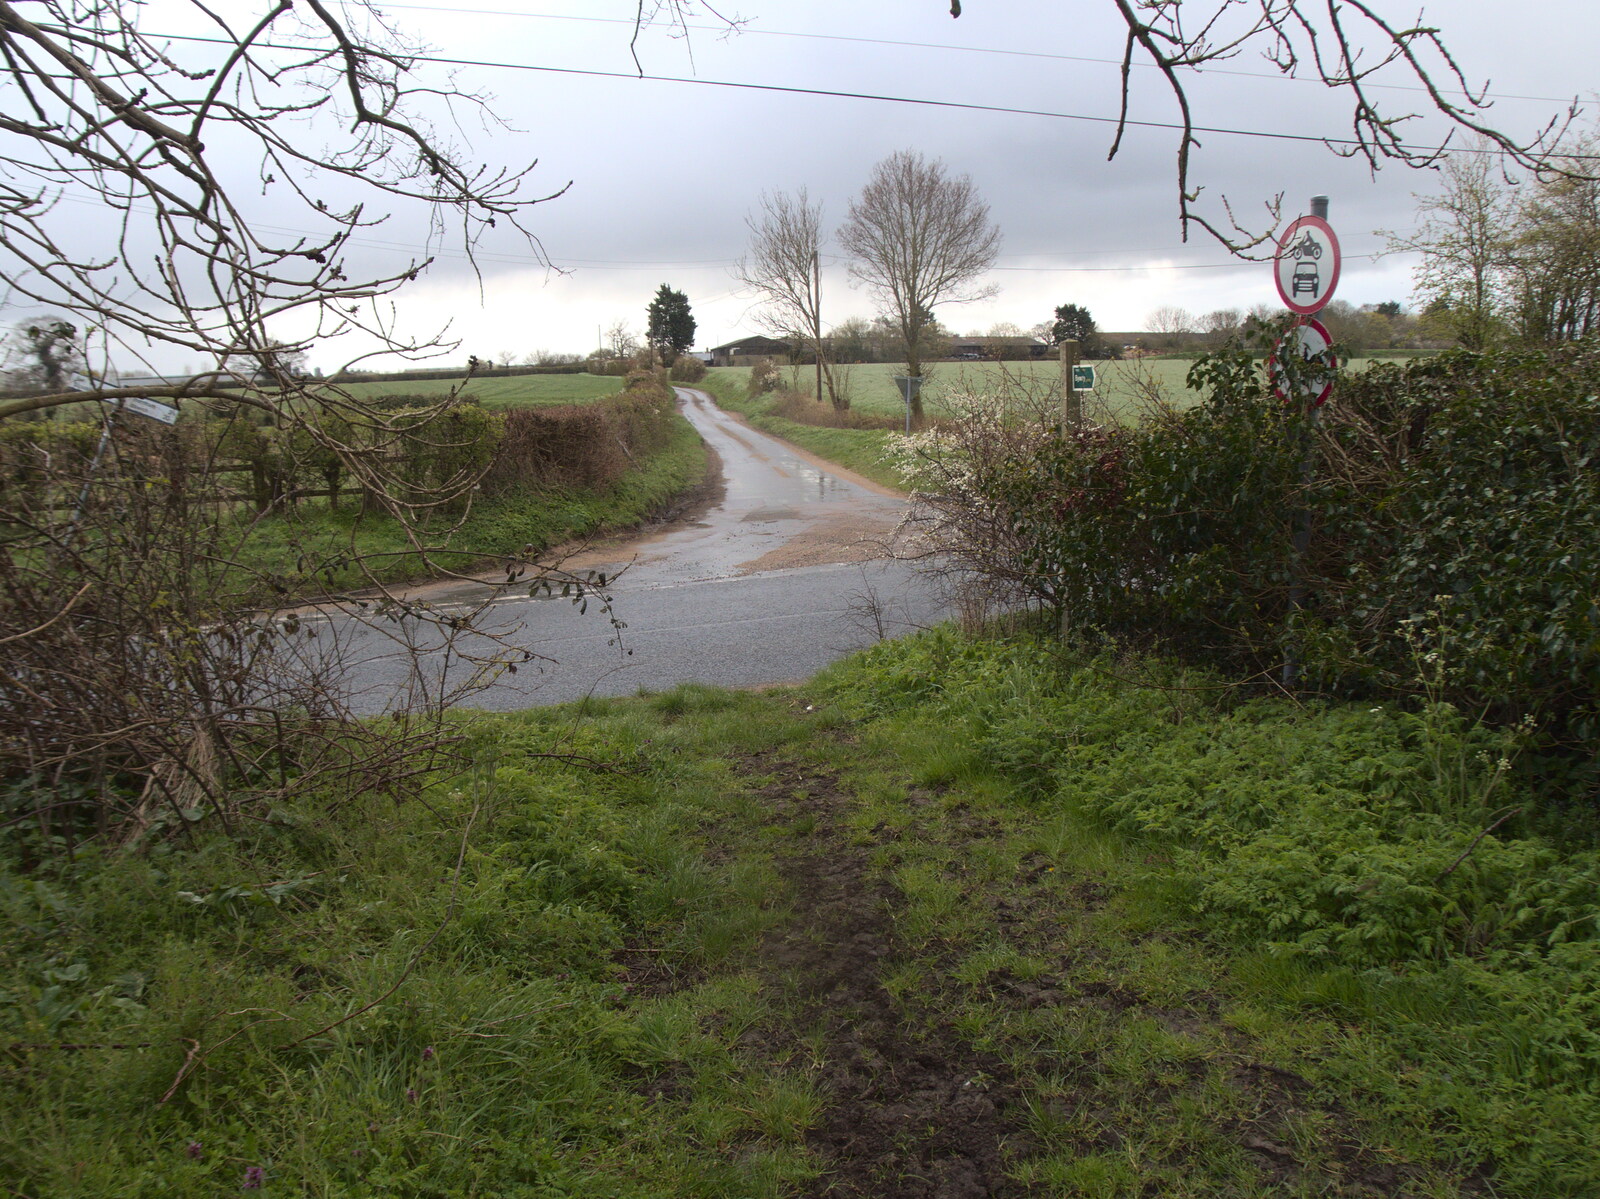 A view of the junction from Rapsy Tapsy lane from Roadworks and Harry's Trampoline, Brome, Suffolk - 6th April 2021